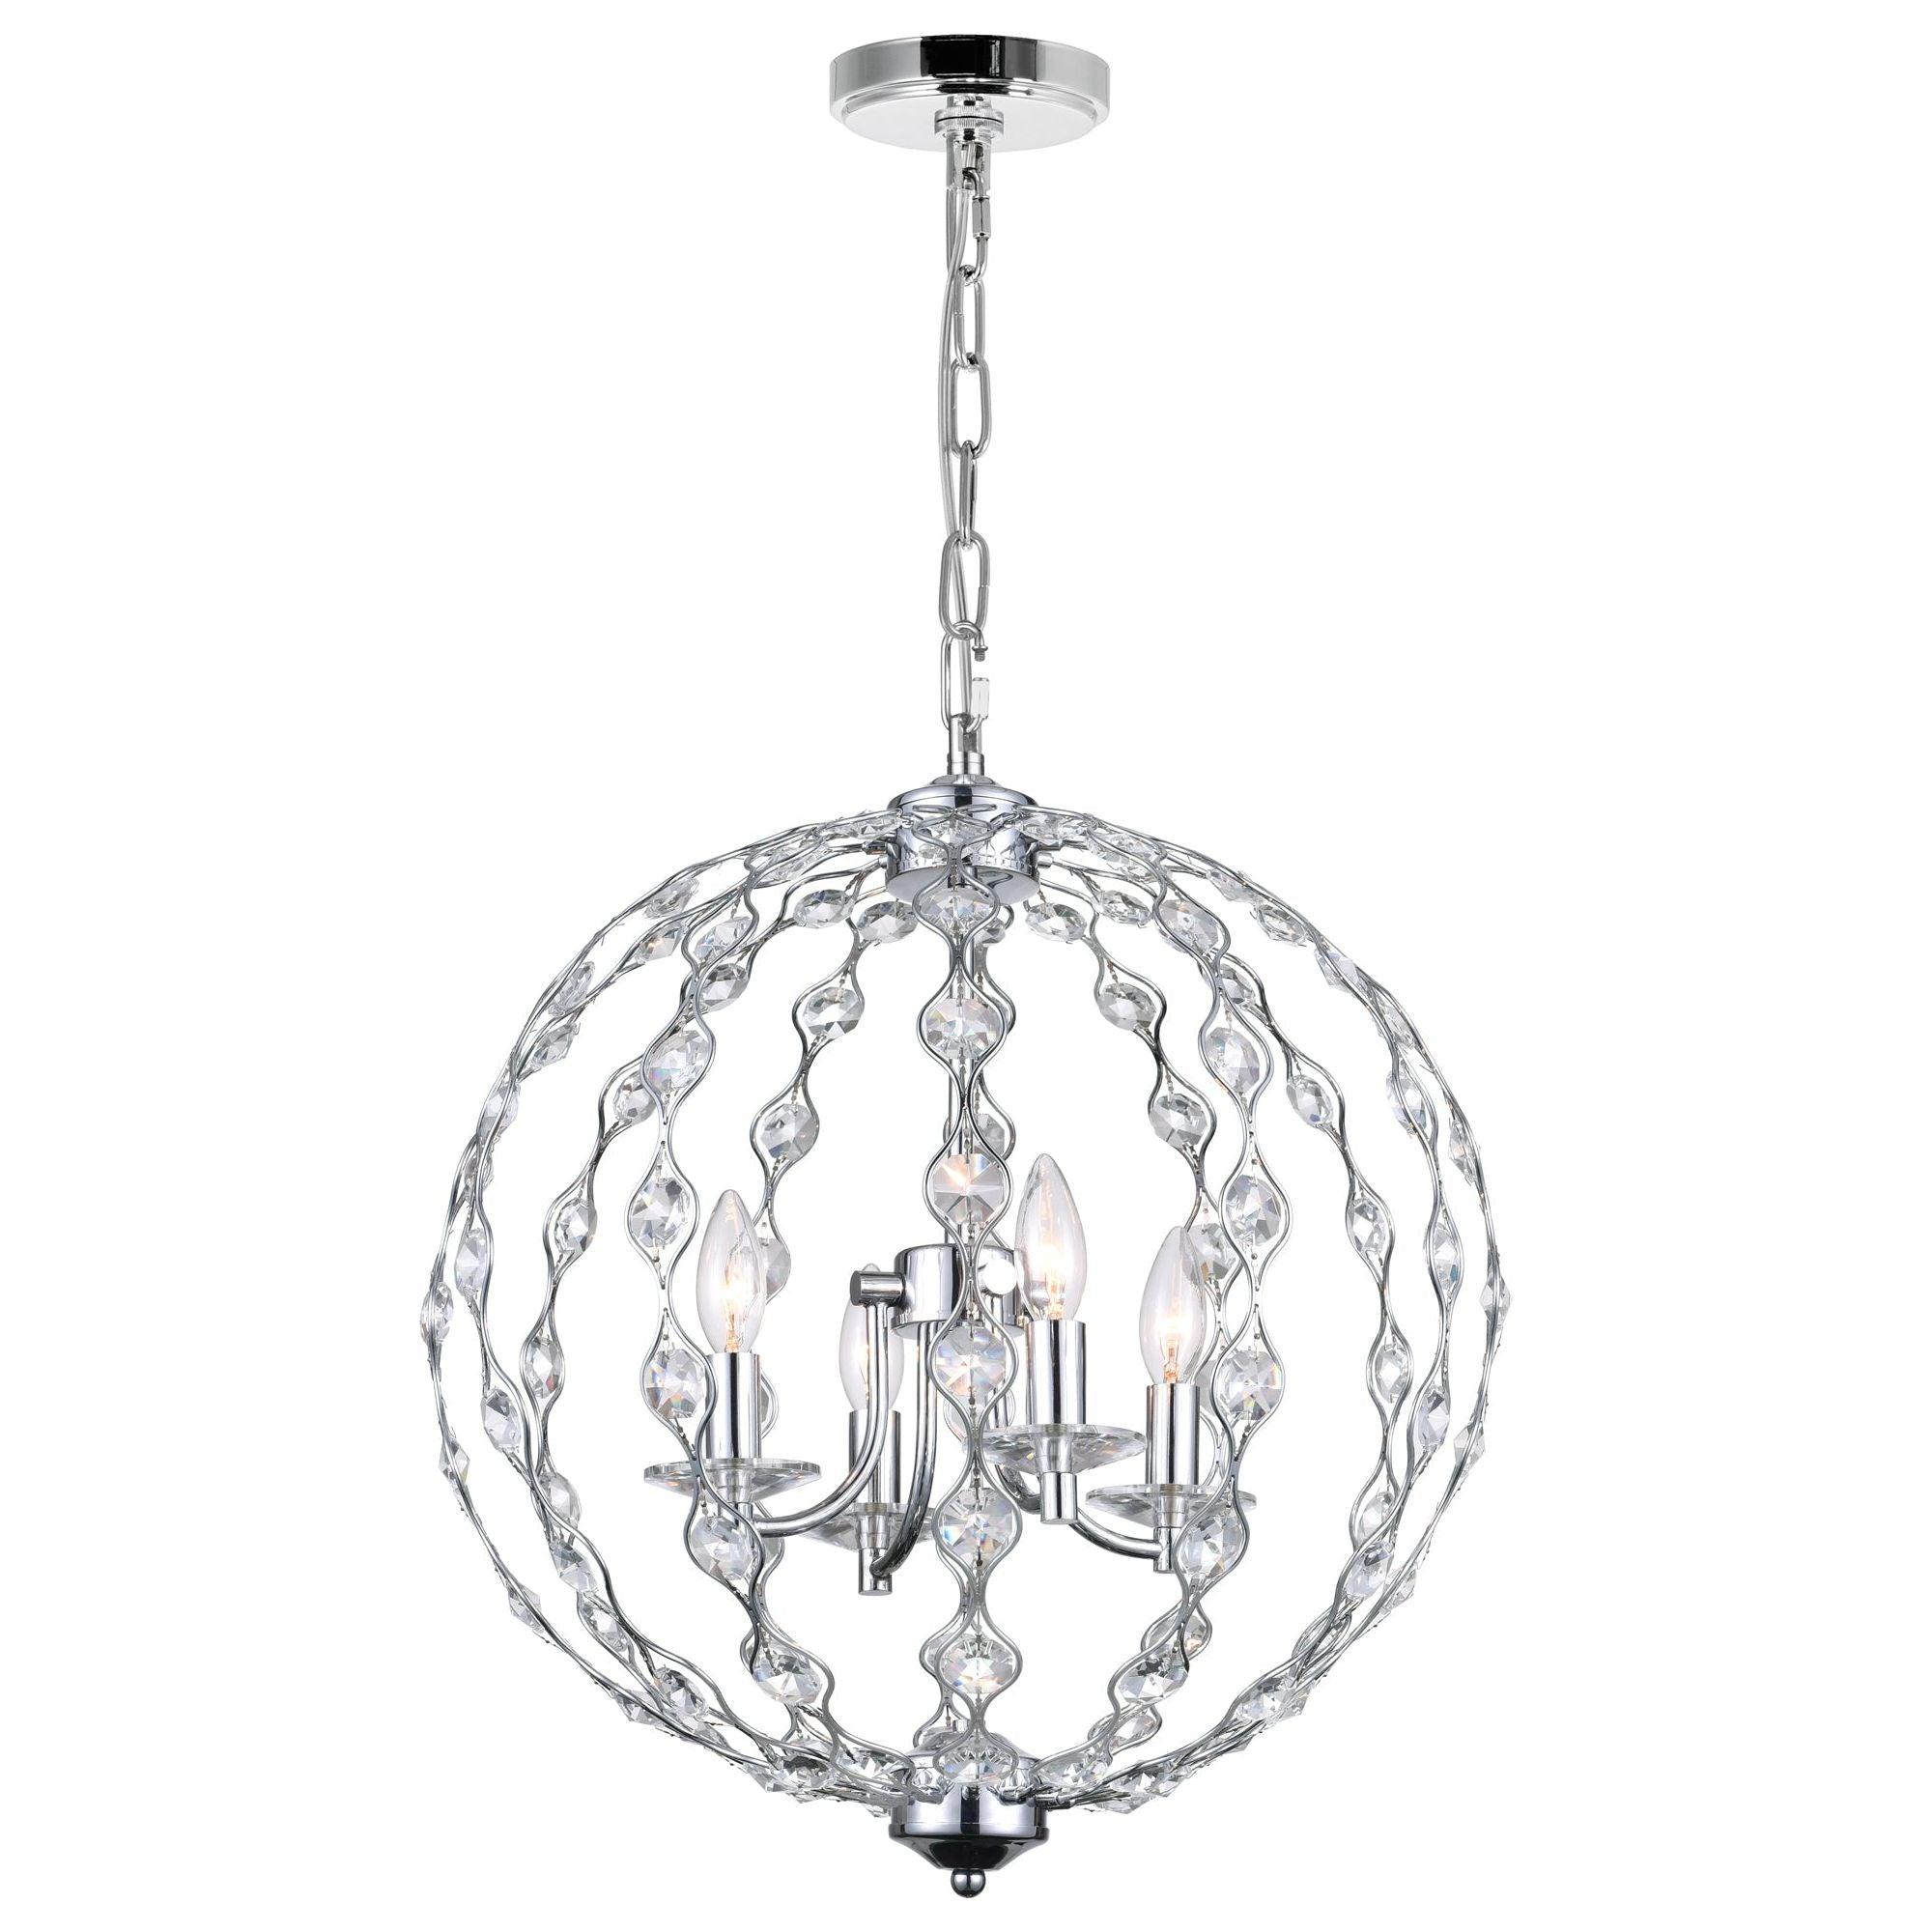 CWI - Esia Chandelier - Lights Canada